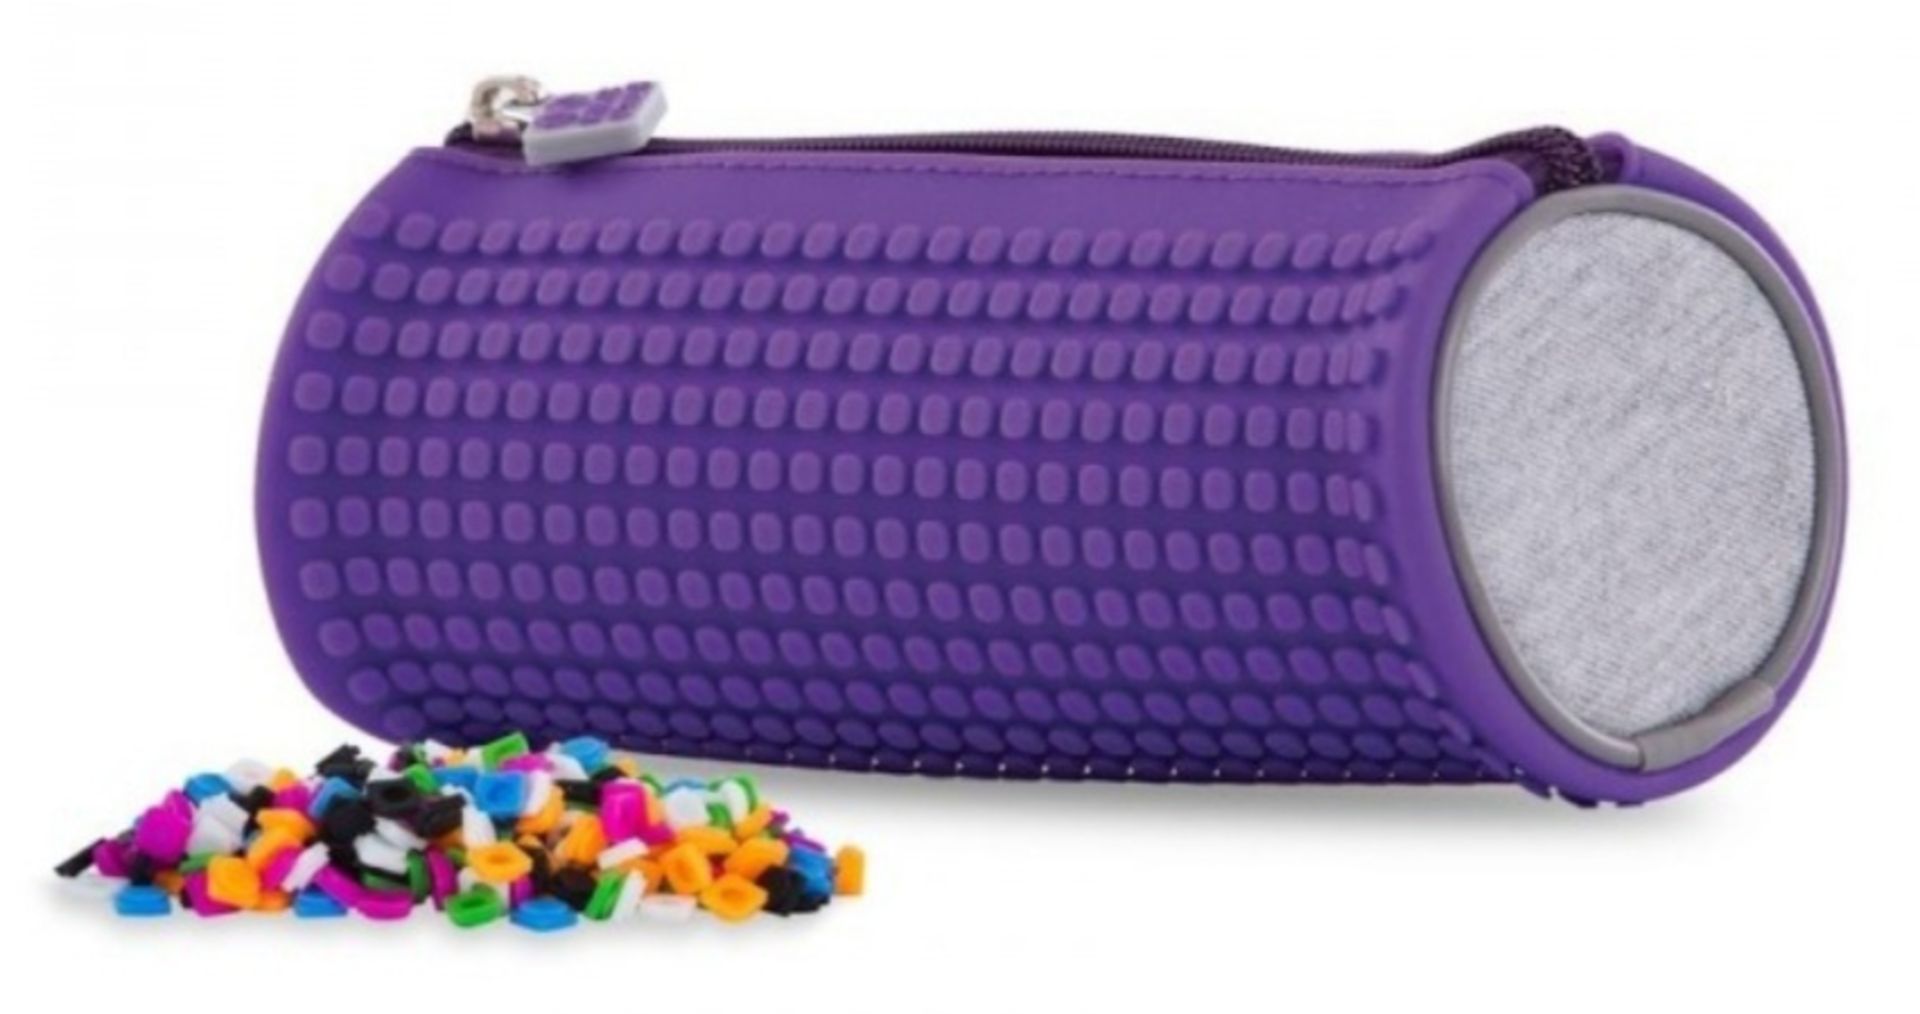 X15 BRAND NEW PIXEL CREW CREATIVE ROUNDED PENCIL CASE - PURPLE. TOTAL RRP £119.88